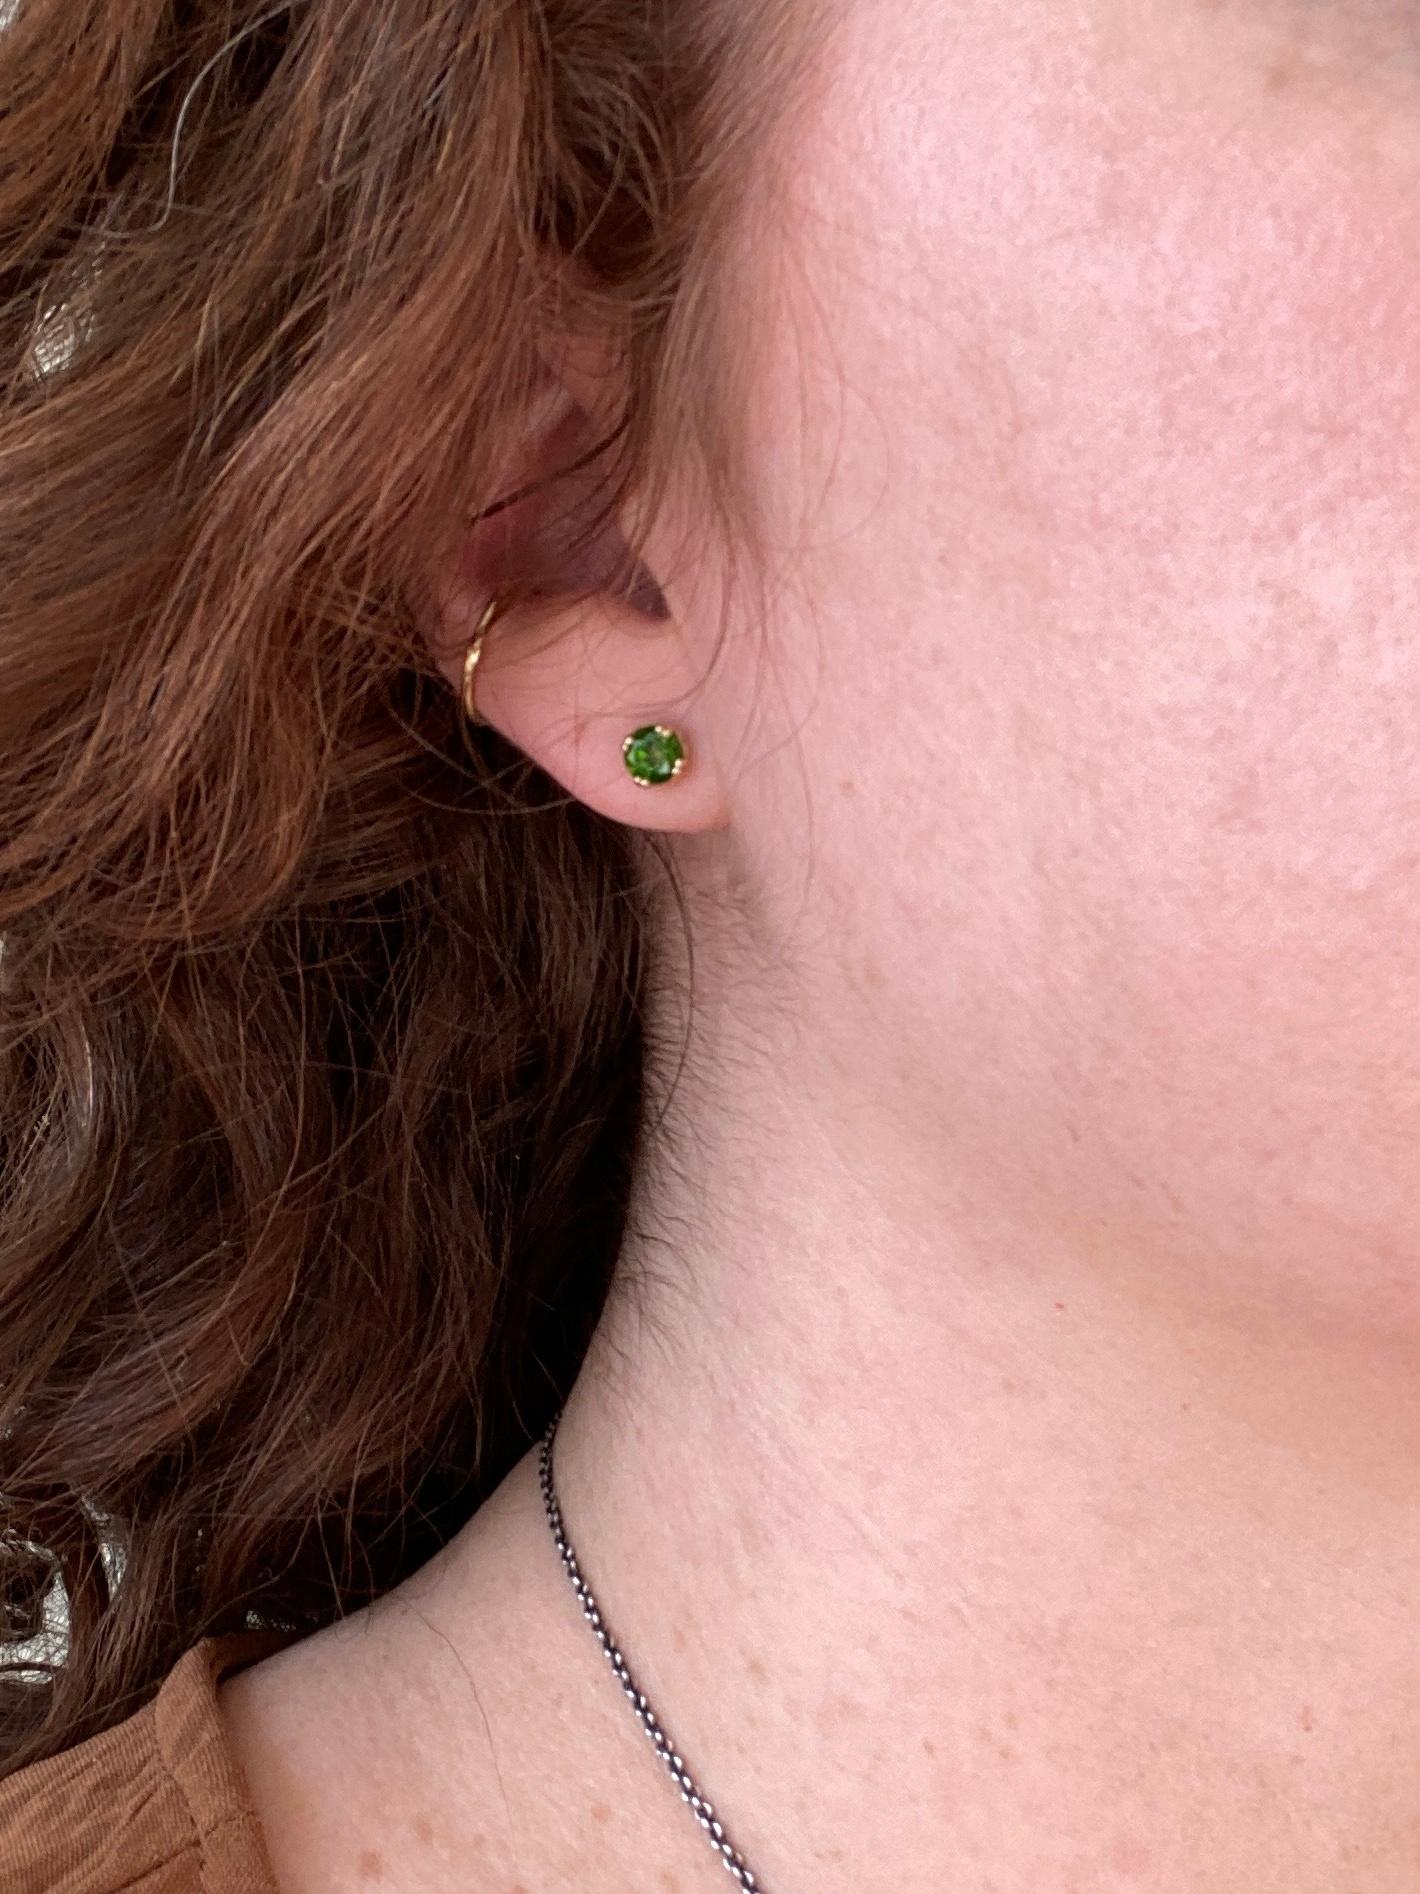 We love the HEARTS on the sides of the settings! Who wants plain studs when you can have heart detail studs instead?

These adorable studs have two great features: 1) GLORIOUSLY colored diopsides and 2) adorable heart detailed settings. 

The